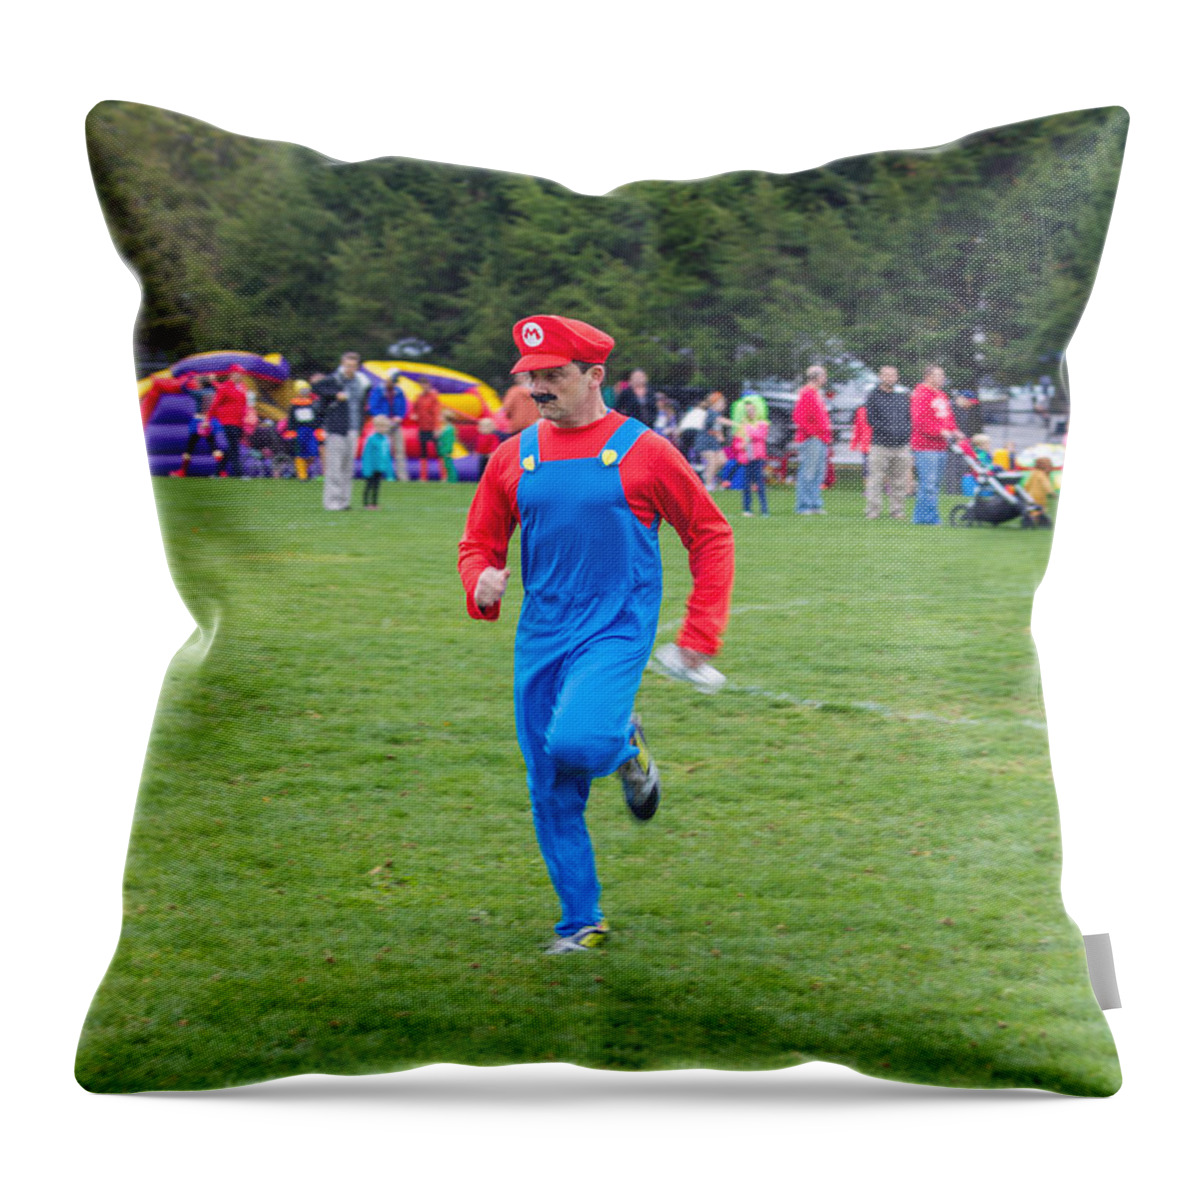  Throw Pillow featuring the photograph Monster Dash 12 by Brian MacLean